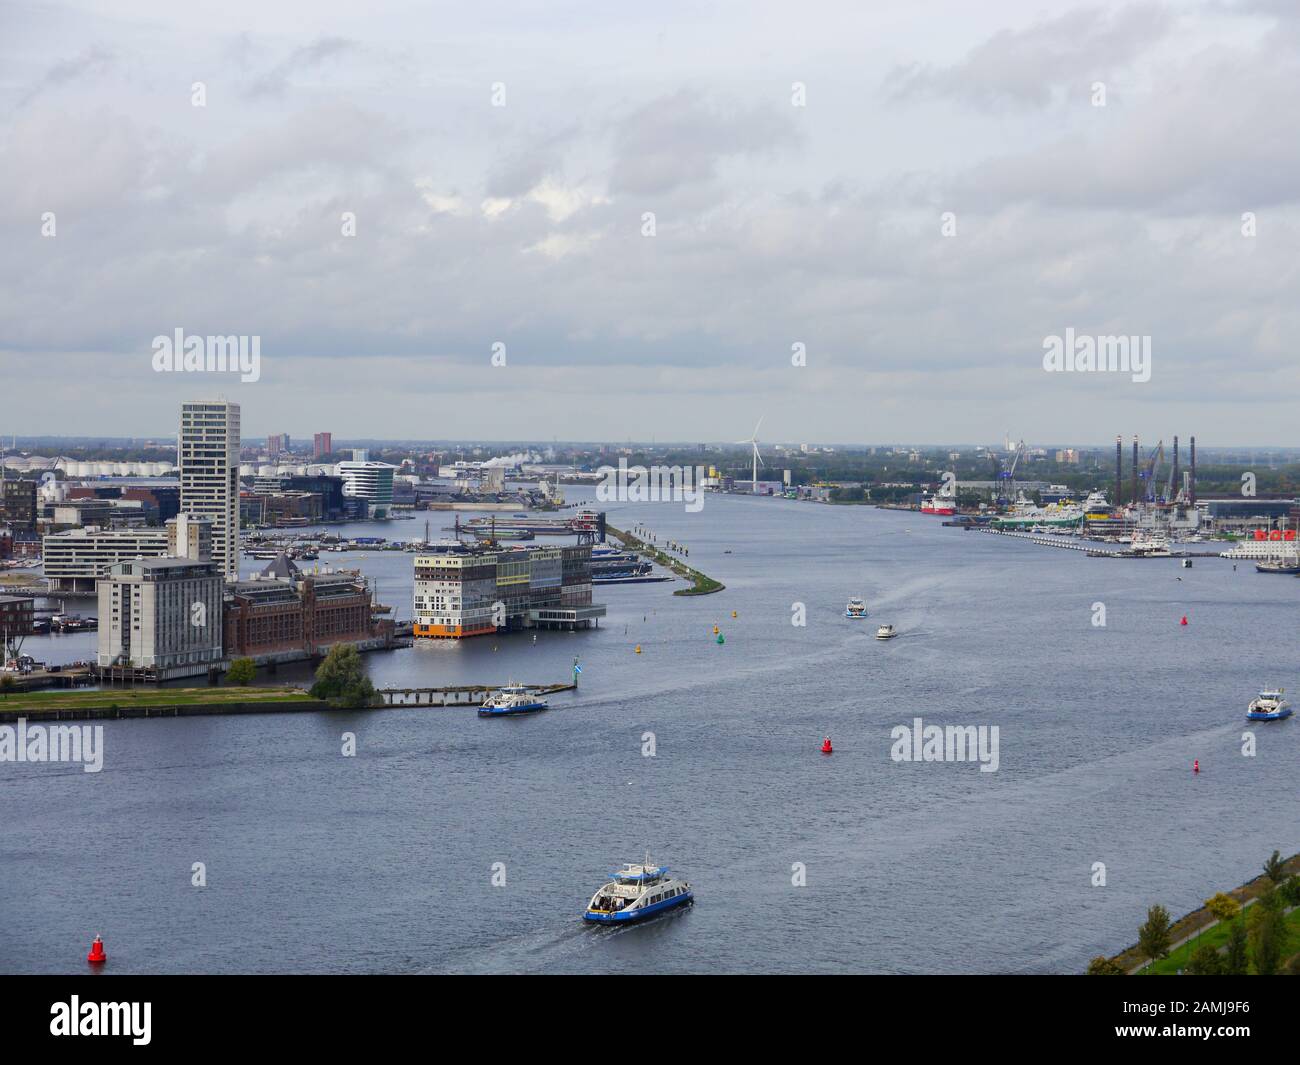 An aerial photograph looking across the canal towards Amsterdam Central Stock Photo